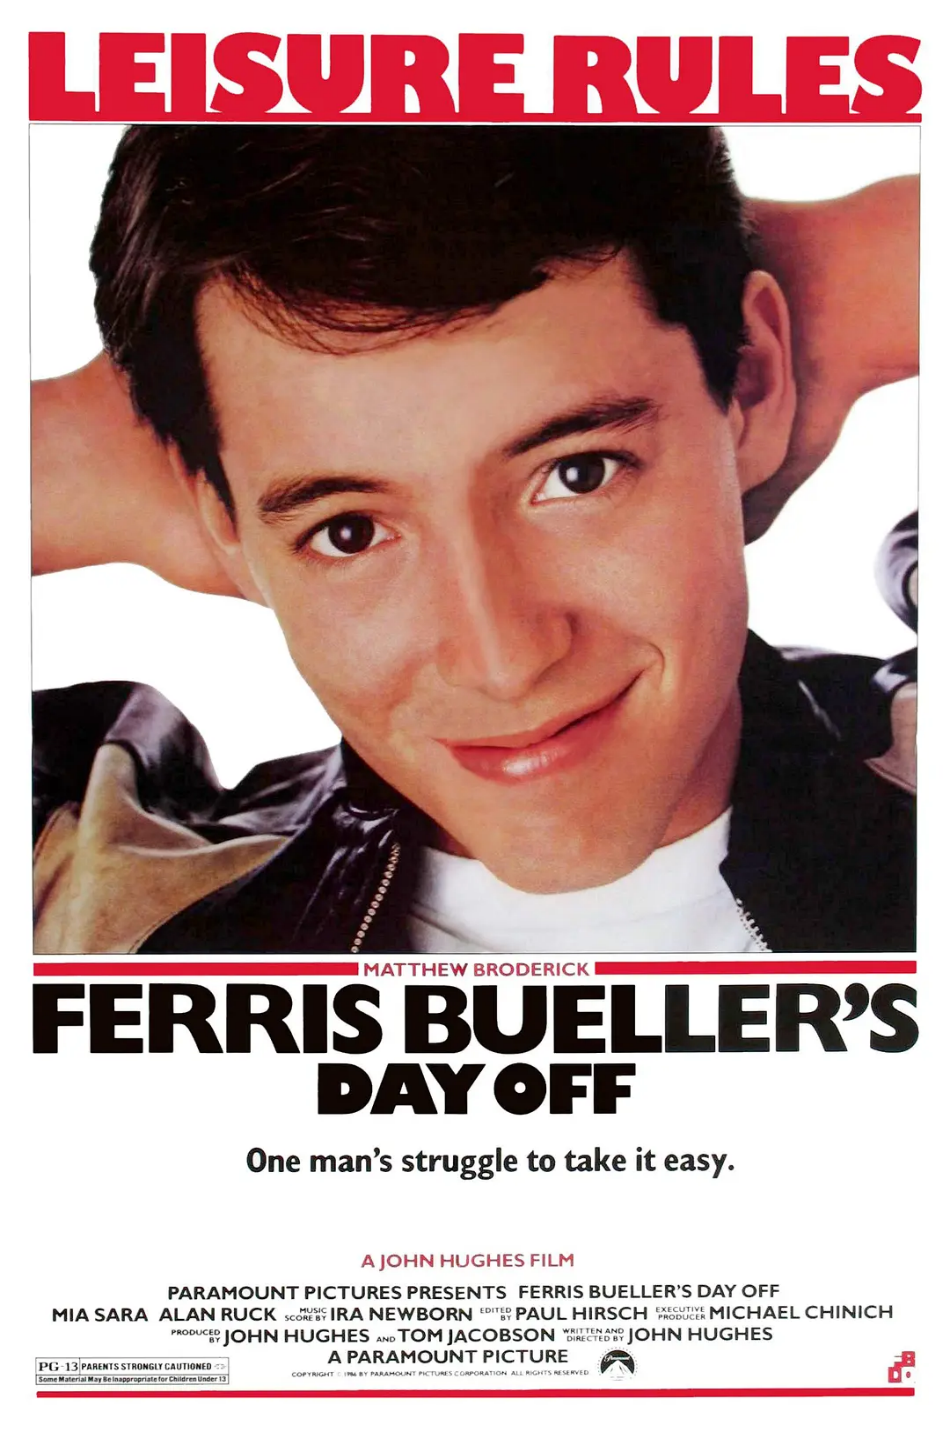 Ferris Bueller’s Day Off The man who watches over the wheat field